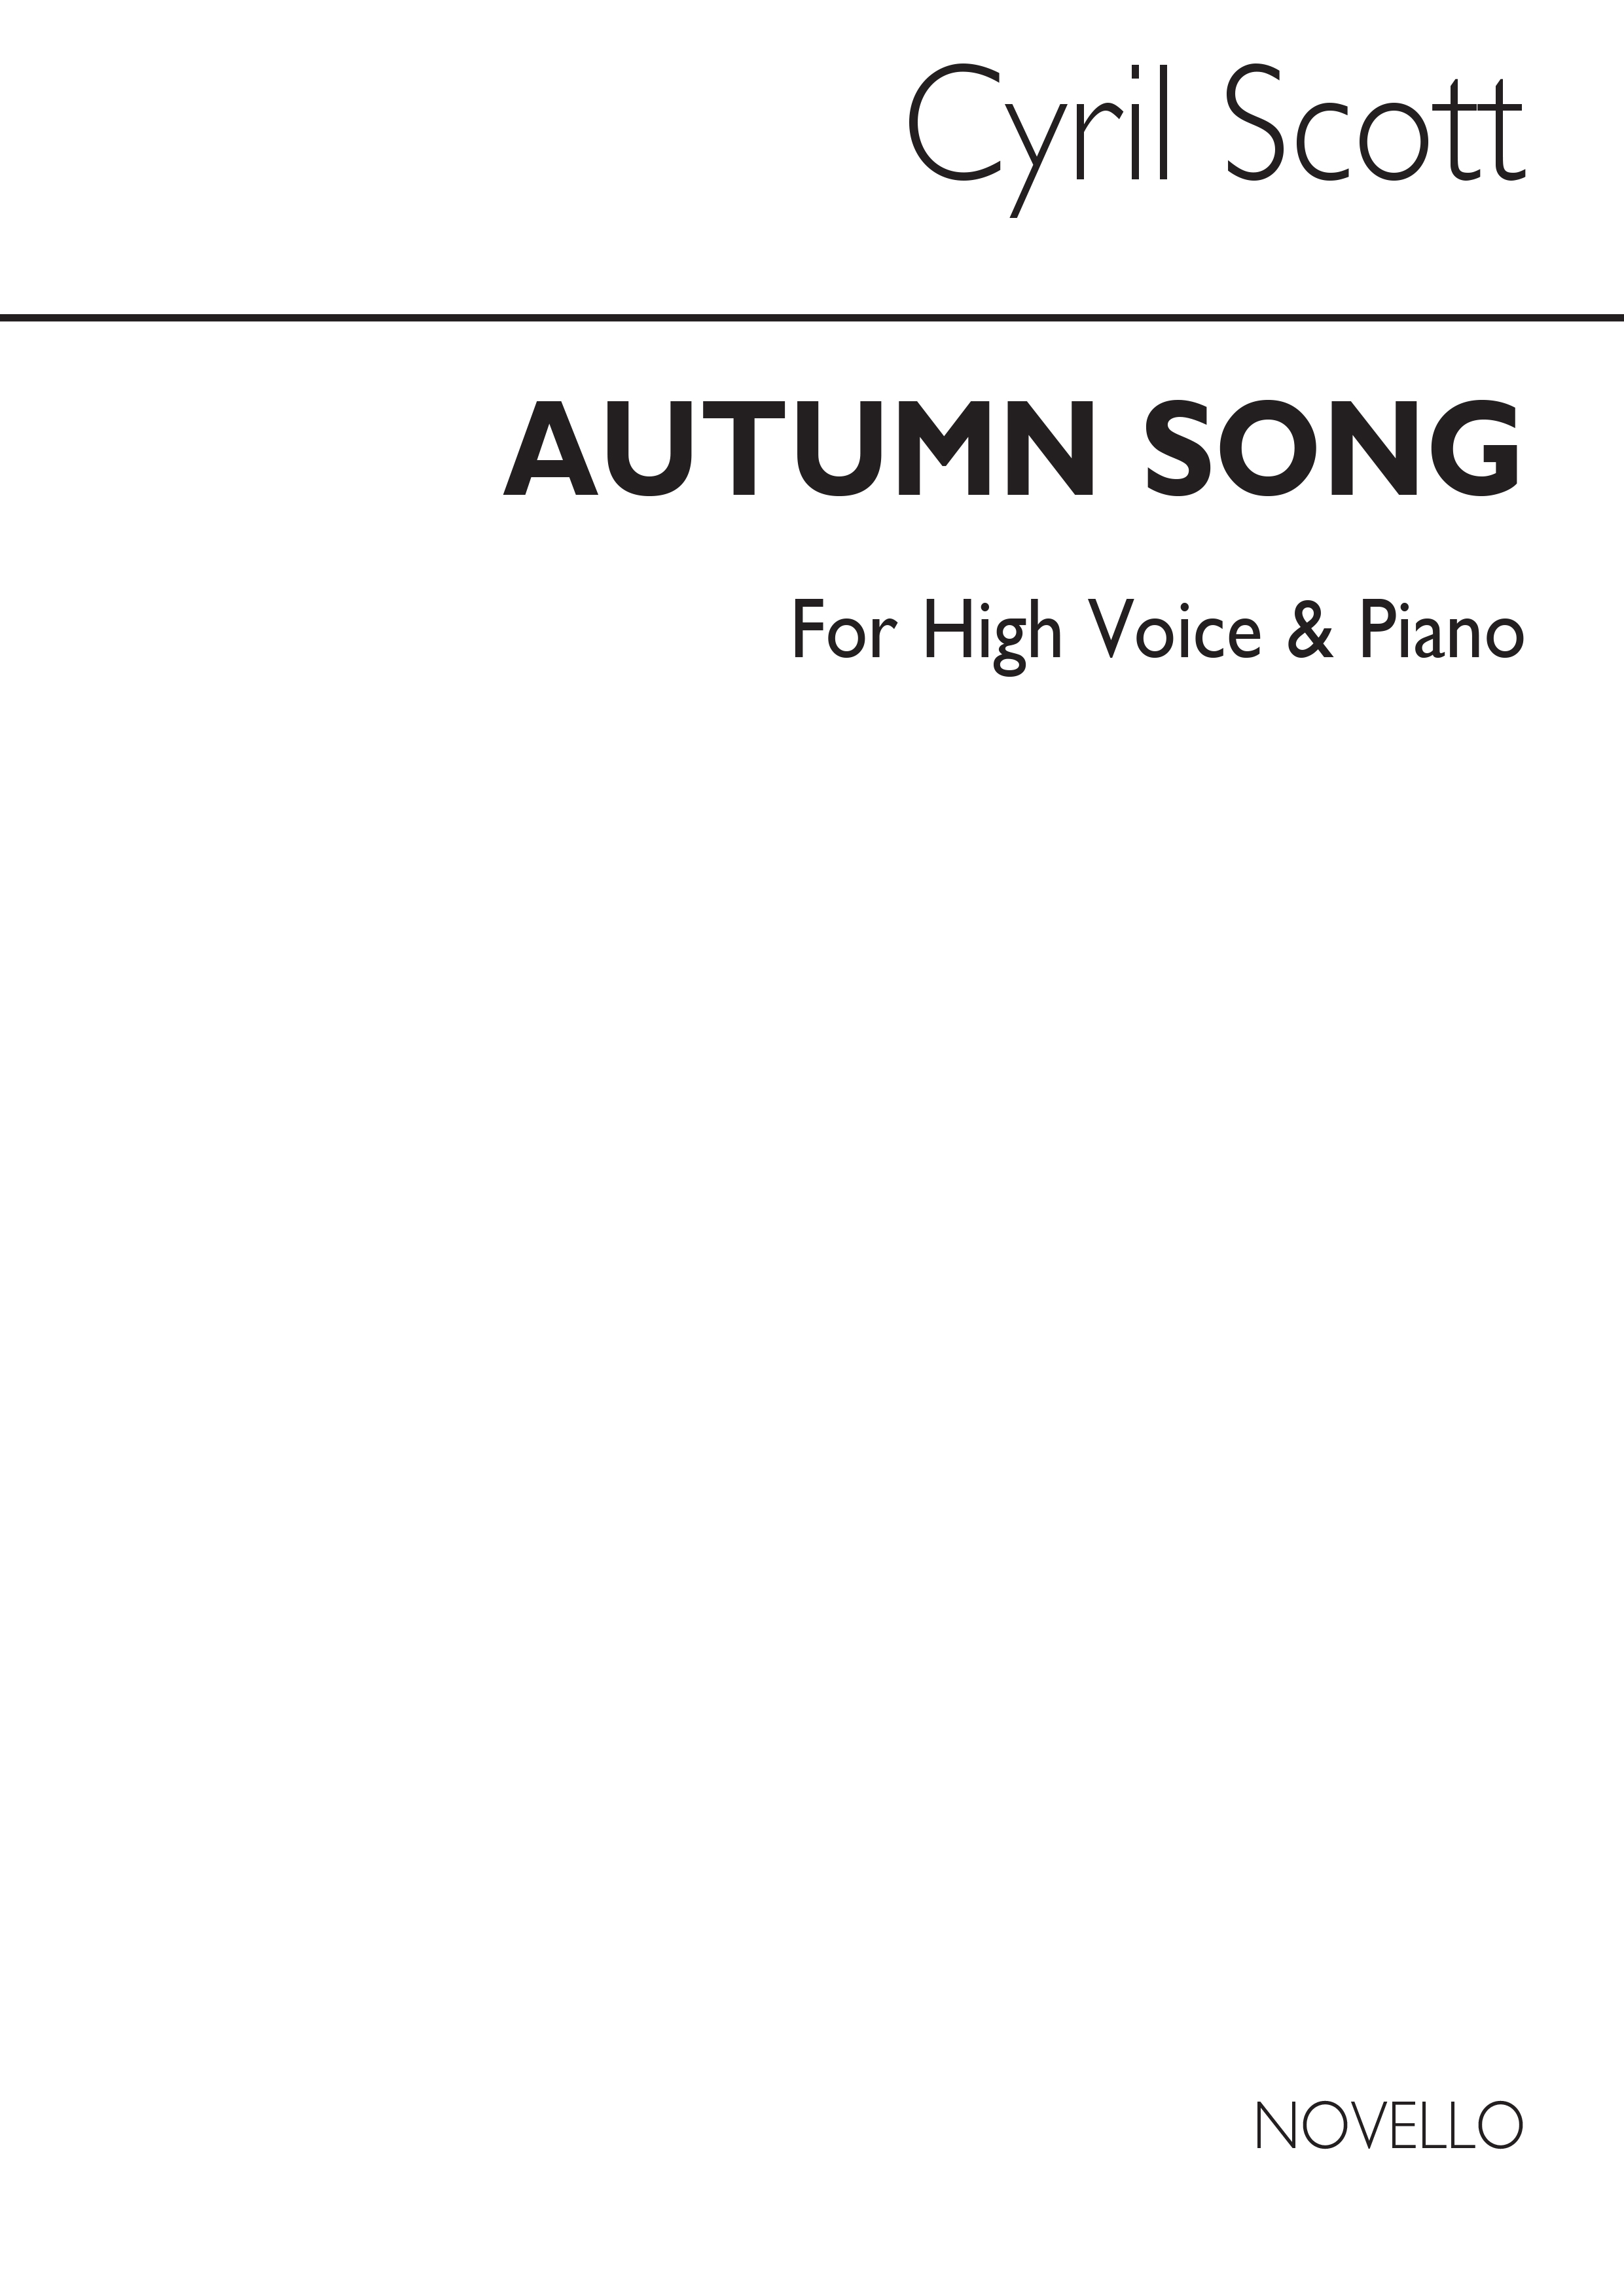 Cyril Scott: Autumn Song-high Voice/Piano (Key-d): High Voice: Vocal Work